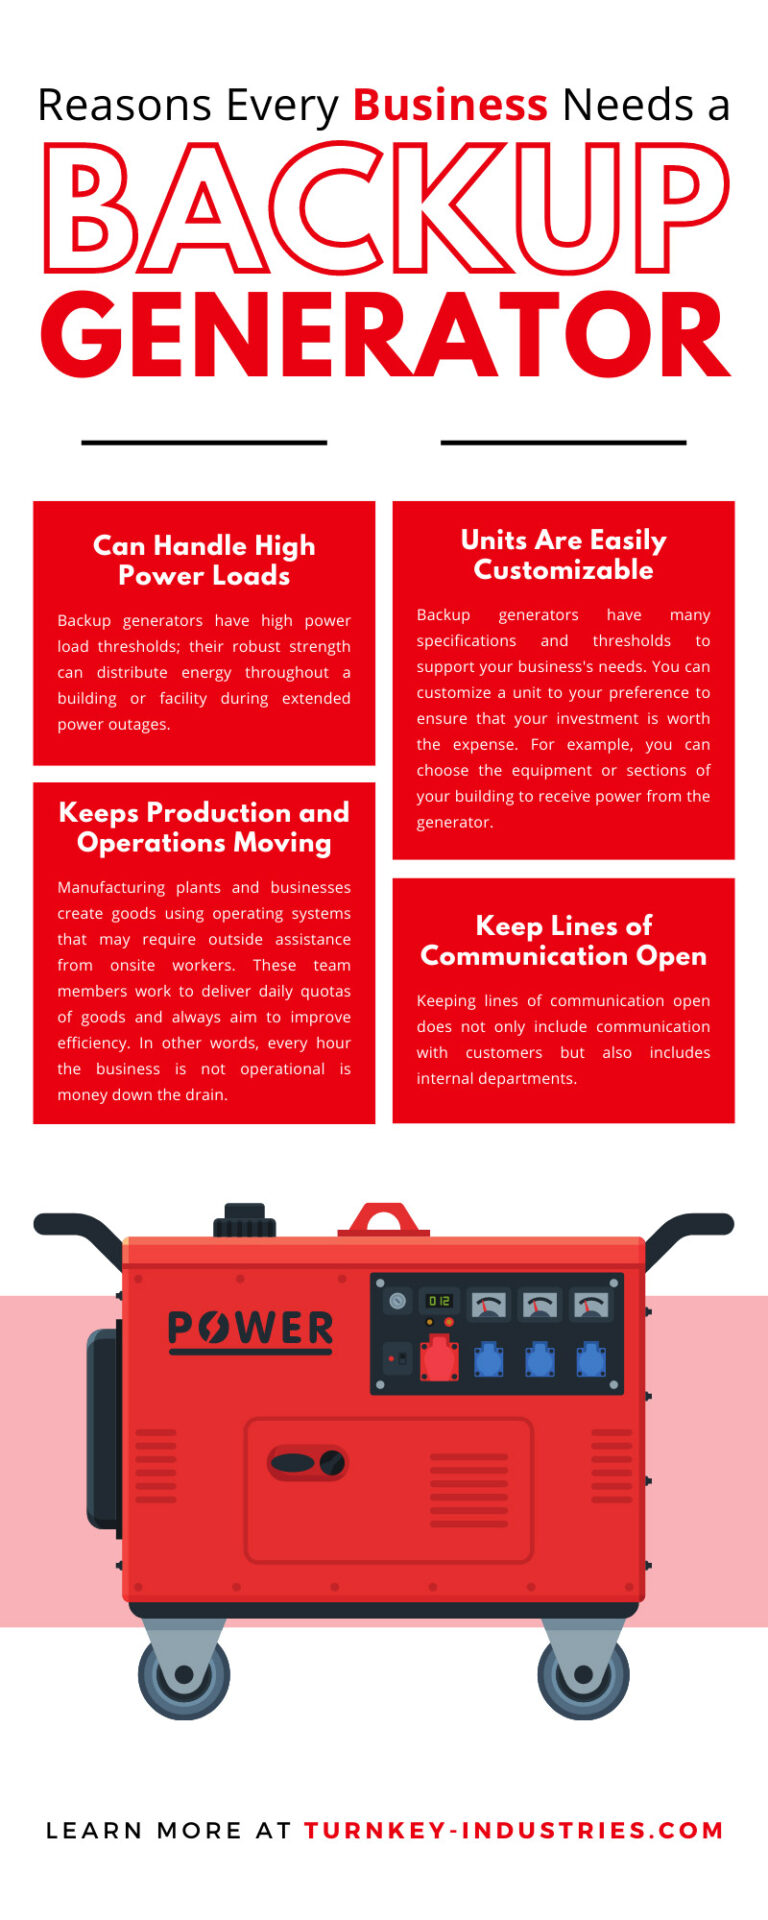 10 Reasons Every Business Needs a Backup Generator